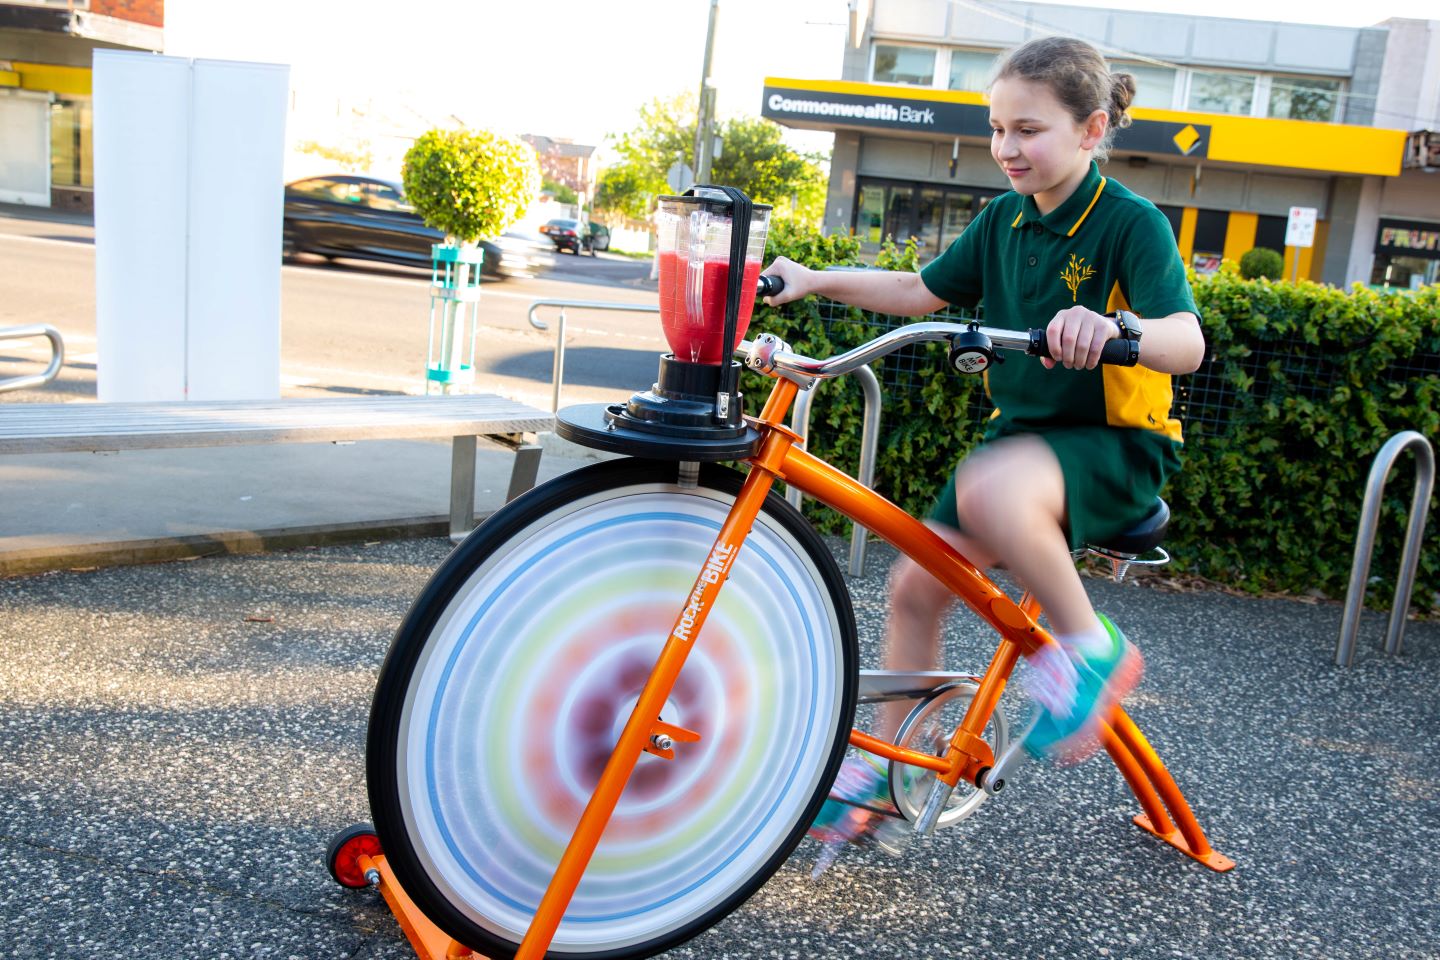 A young person riding on a stationary bike that is powering a blender making a smoothie